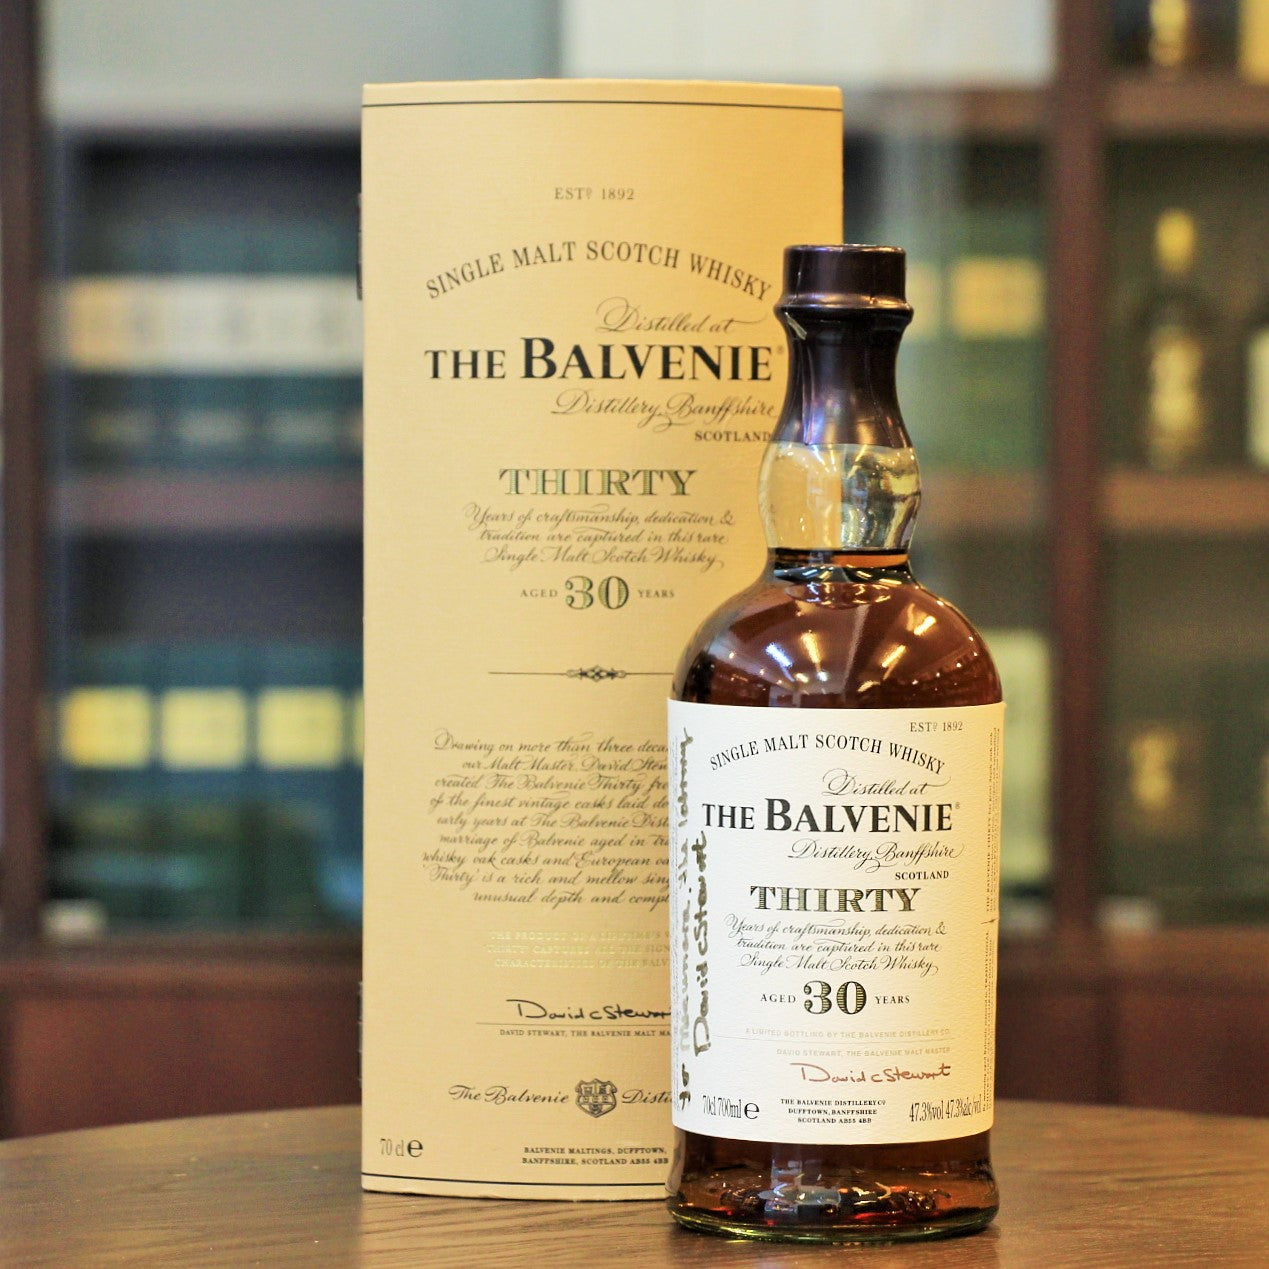 A rare and old presentation of the Balvenie 30 Single Malt Whisky signed by David Stewart